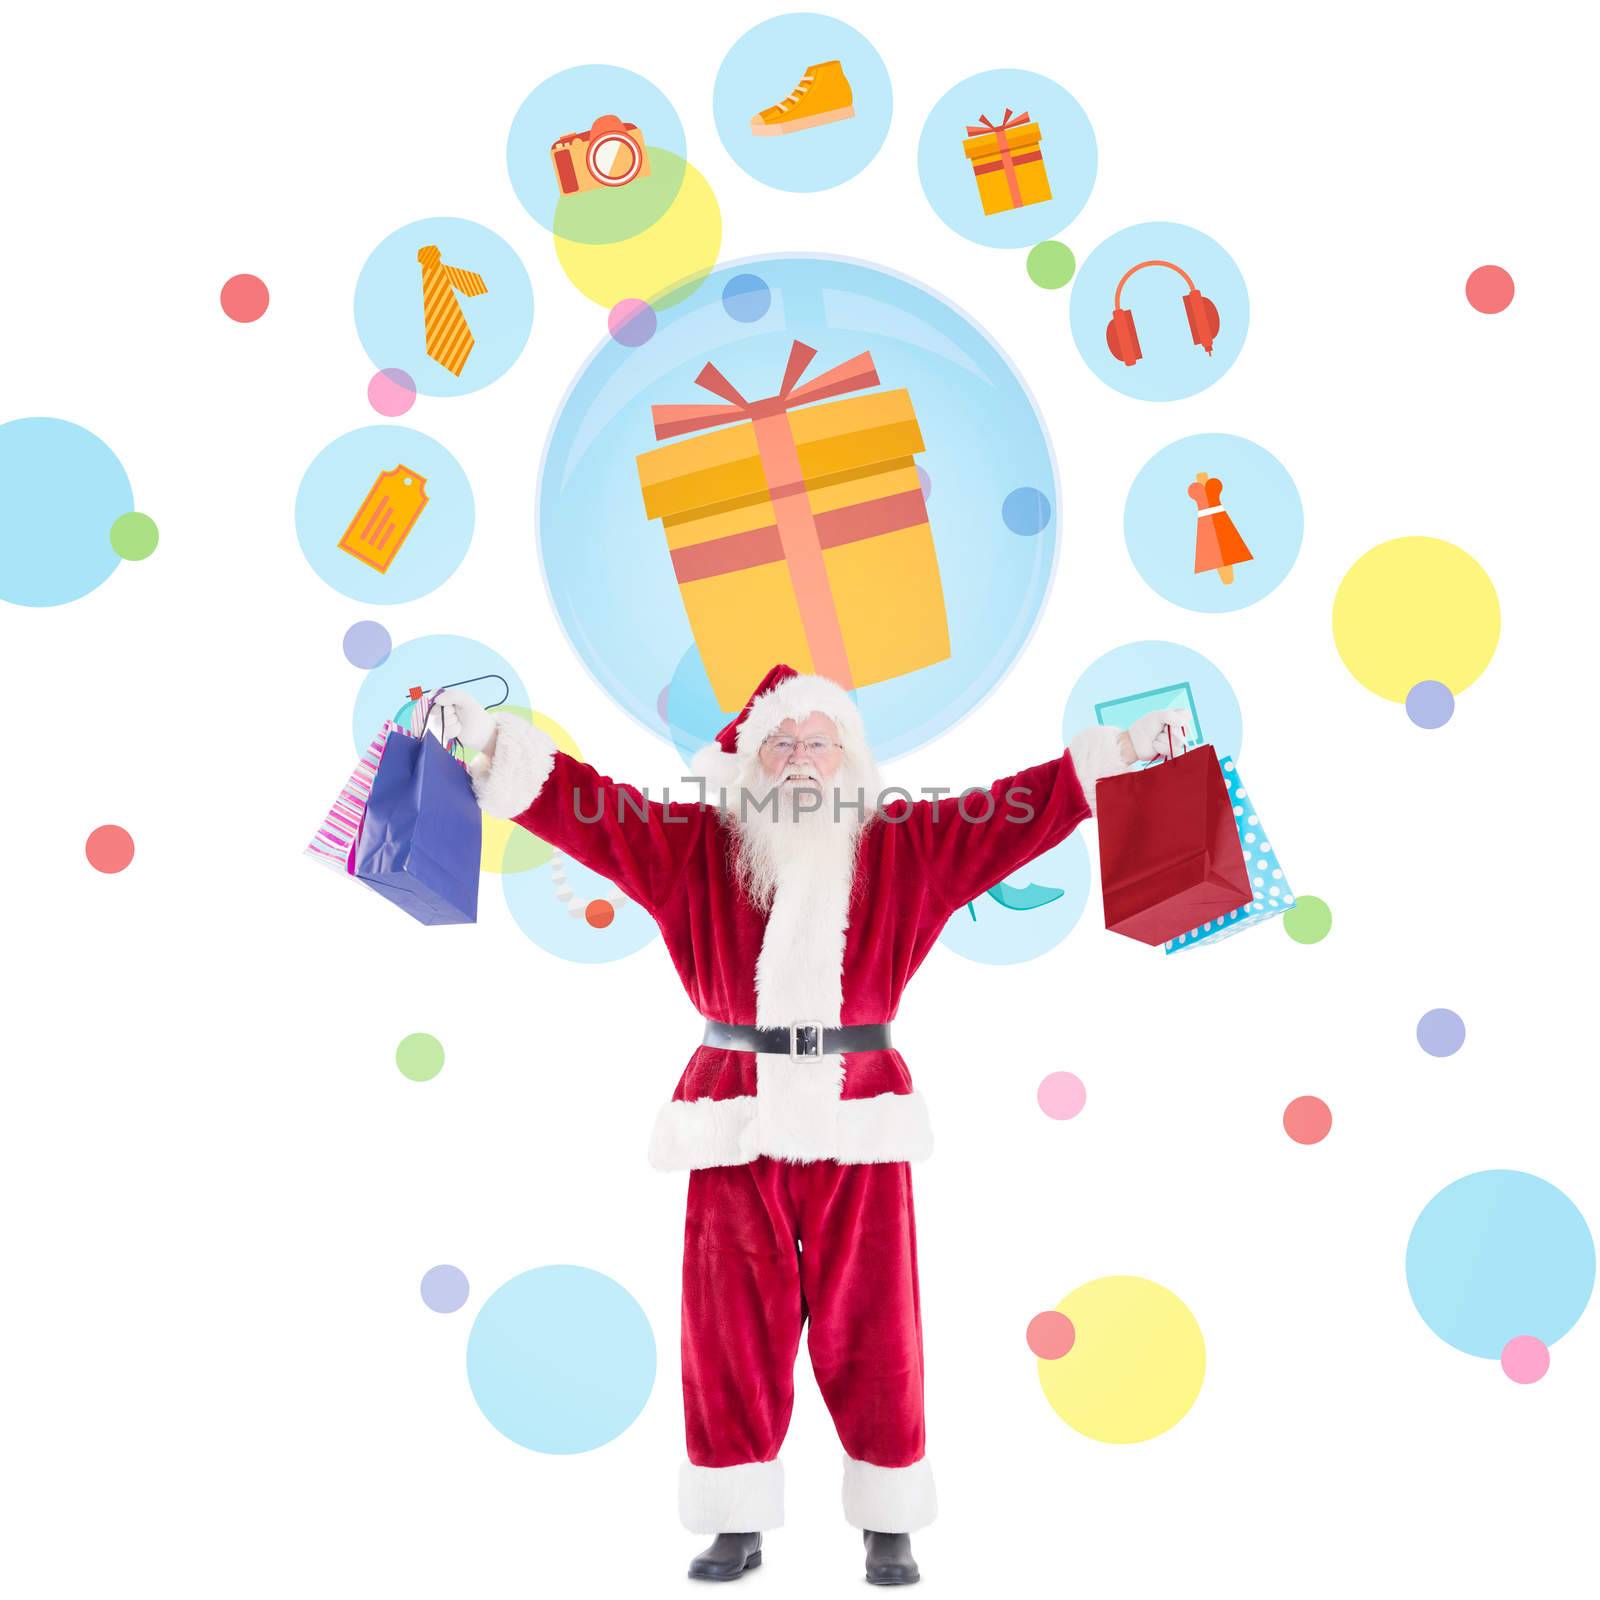 Santa carrying gifts against dot pattern